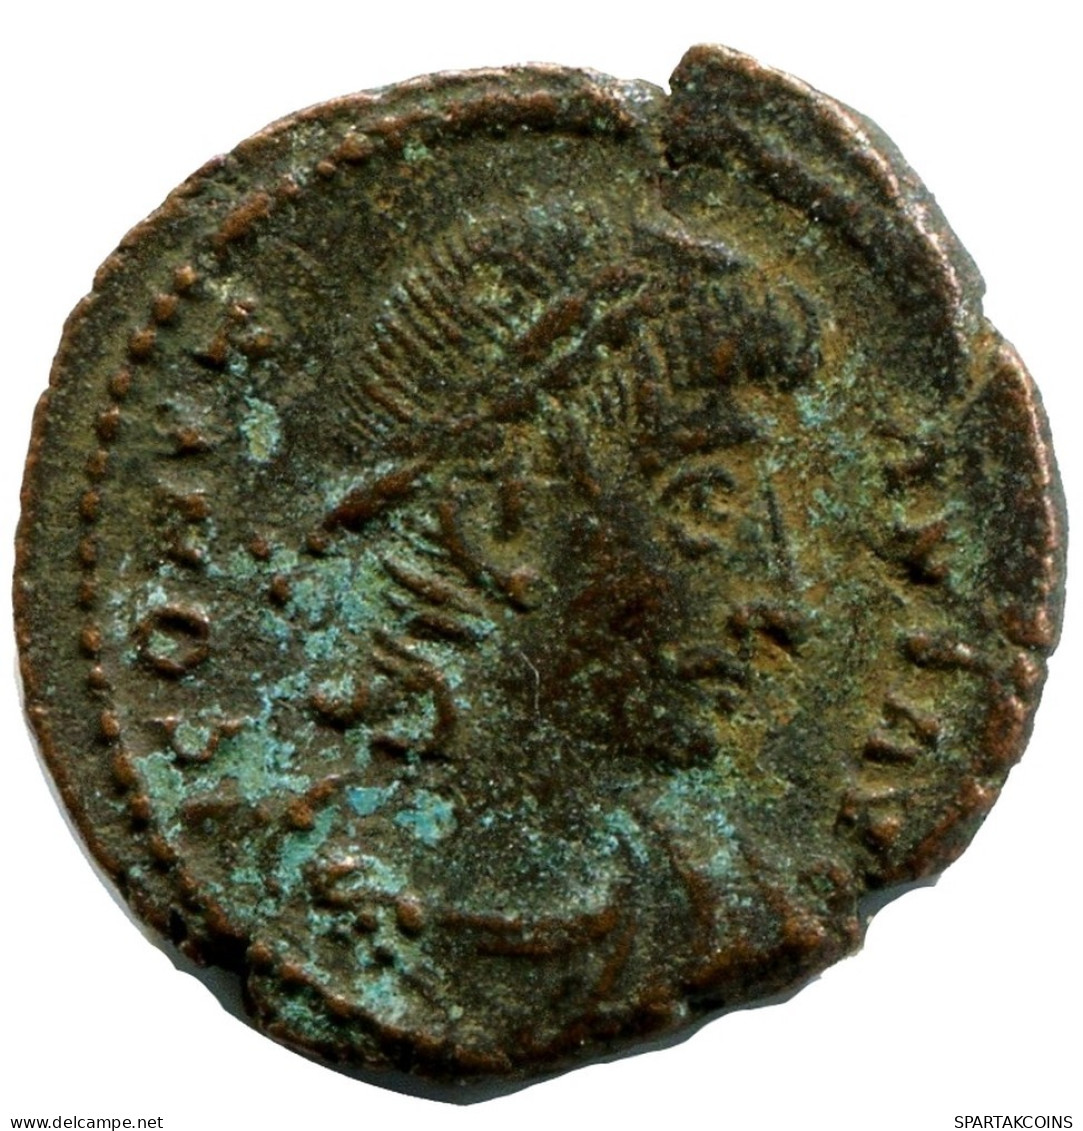 CONSTANS MINTED IN ALEKSANDRIA FROM THE ROYAL ONTARIO MUSEUM #ANC11467.14.E.A - El Imperio Christiano (307 / 363)